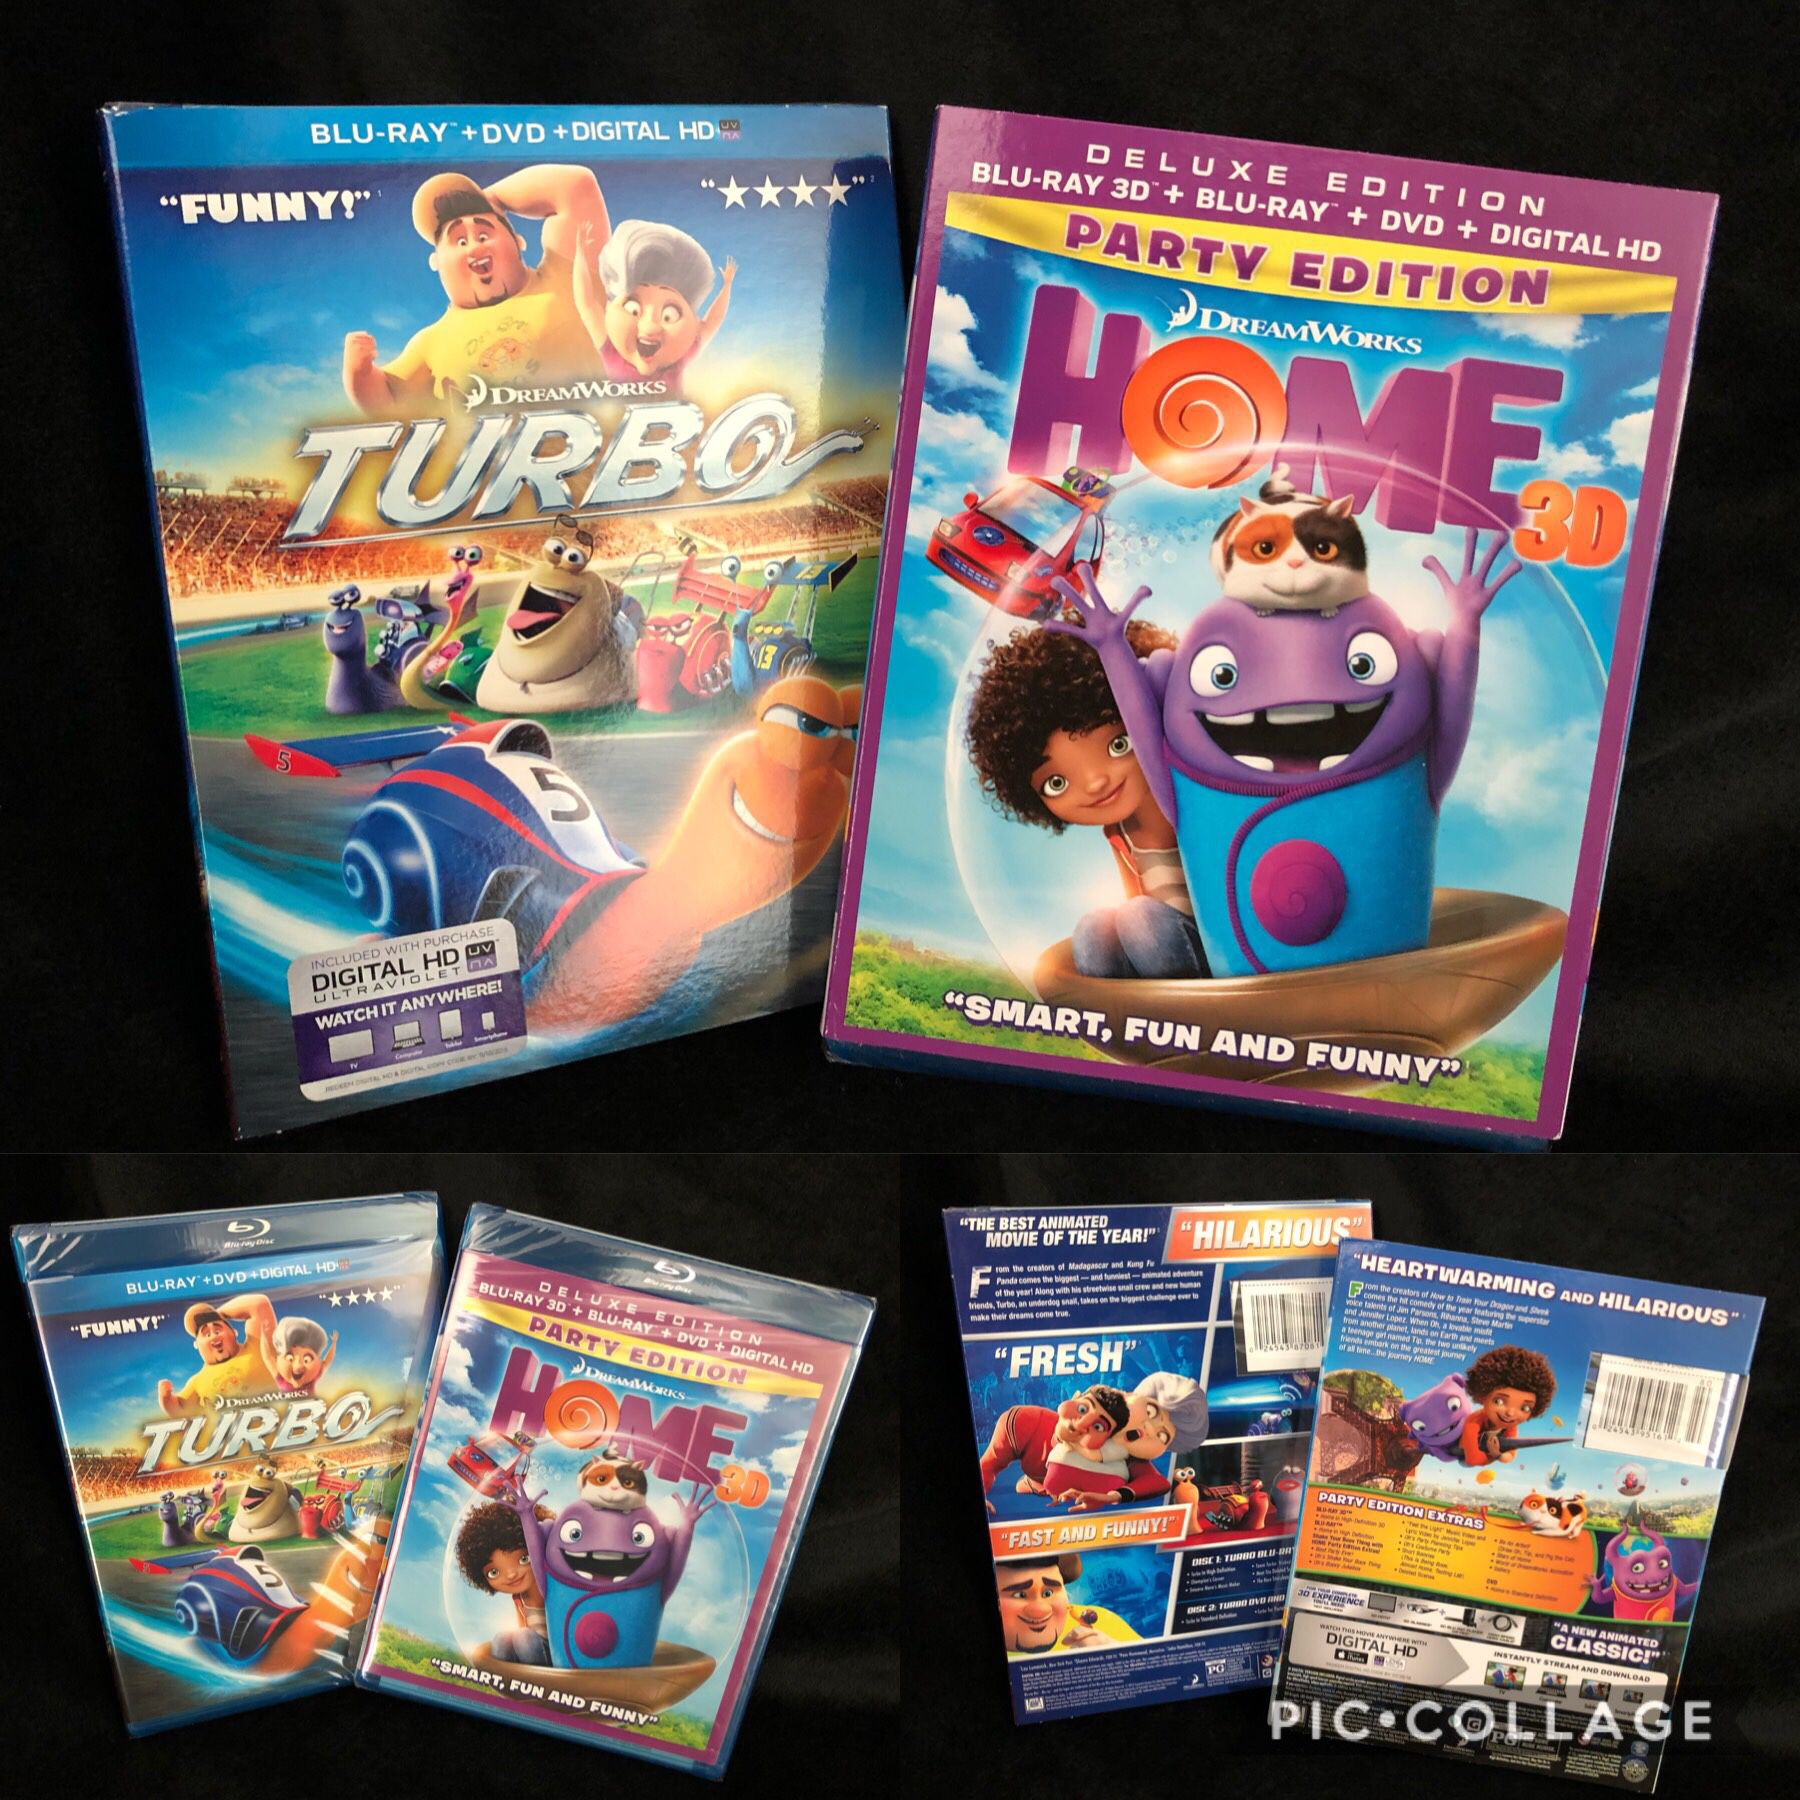 Home and Turbo animated movies